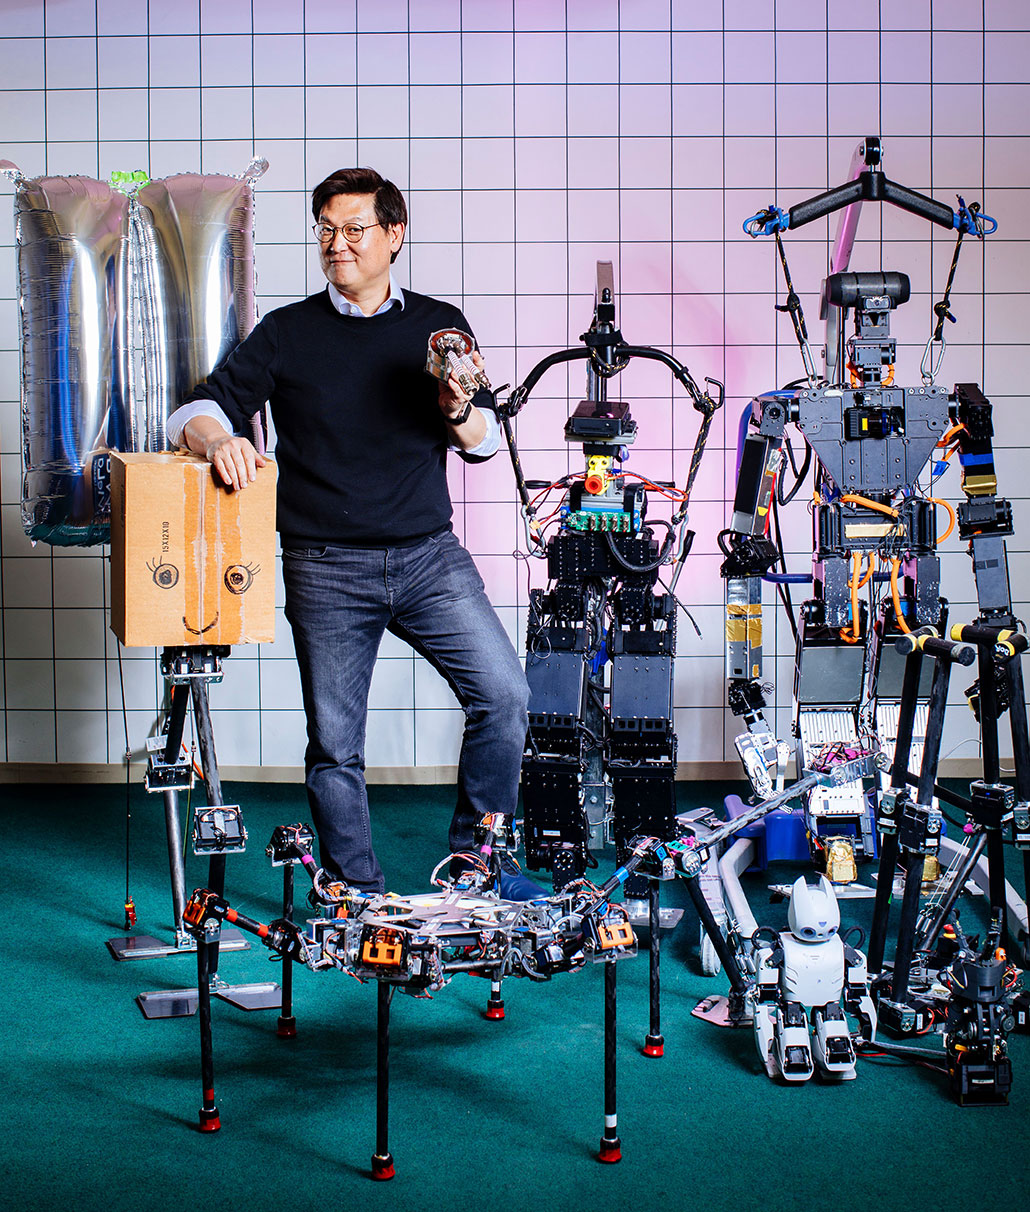 Dennis Hong standing with multiple robots and smiling